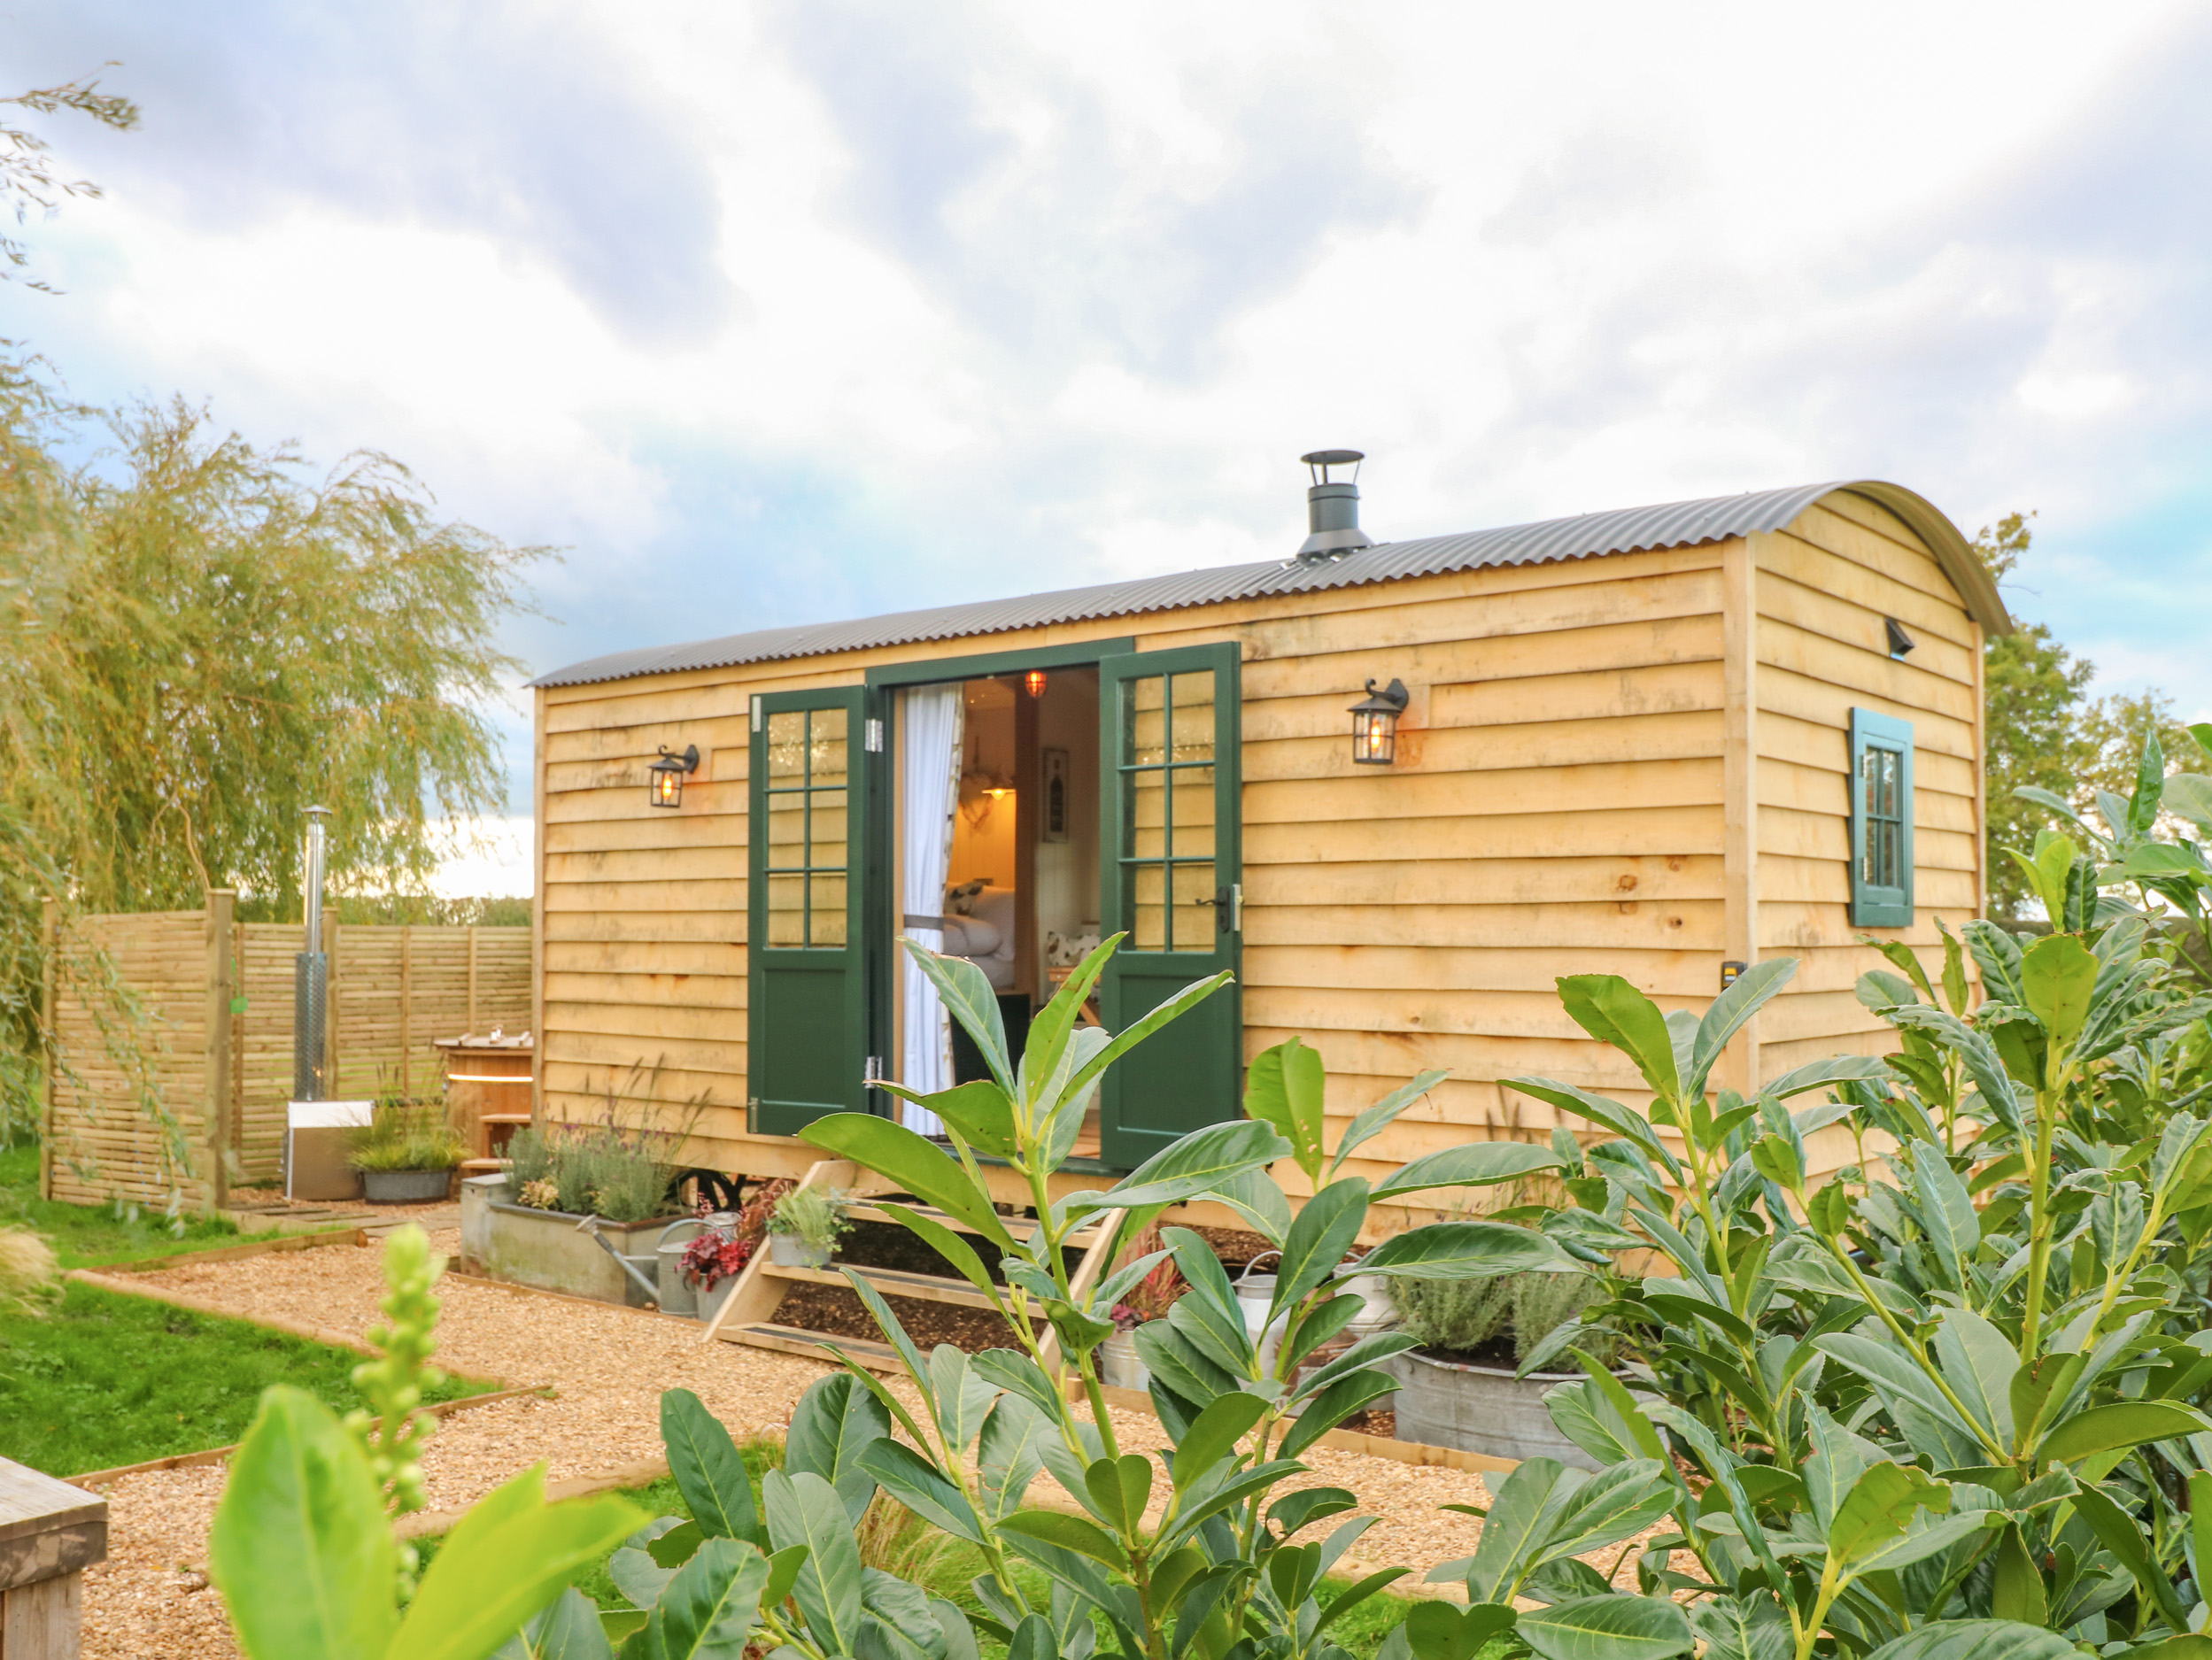 Poppie's Shepherds Hut in Bottesford, Leicestershire. Woodburning stove. Hot tub. Fire pit. Romantic